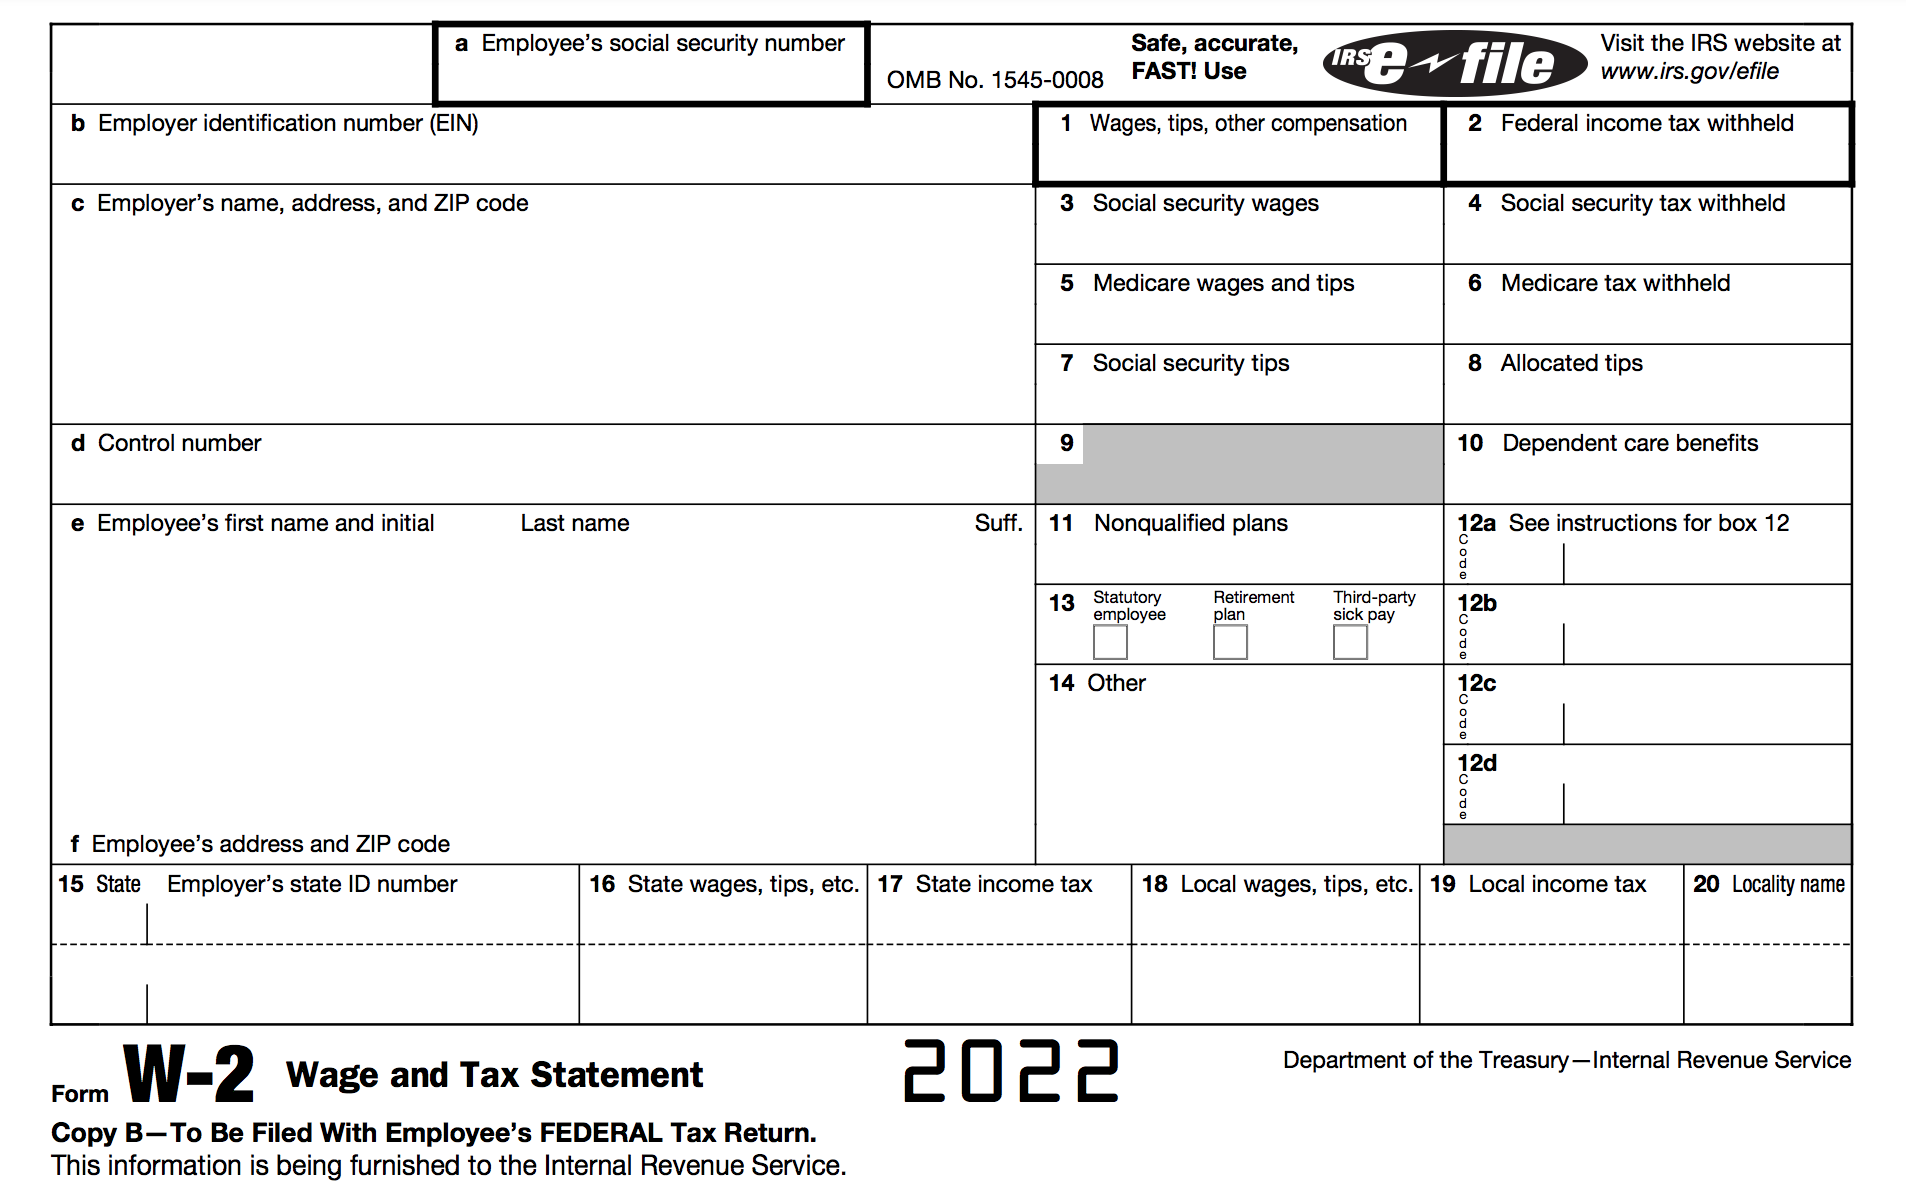 How To Fill Out A W-2 Tax Form | Smartasset pertaining to How Do You Fill Out A W2 Form